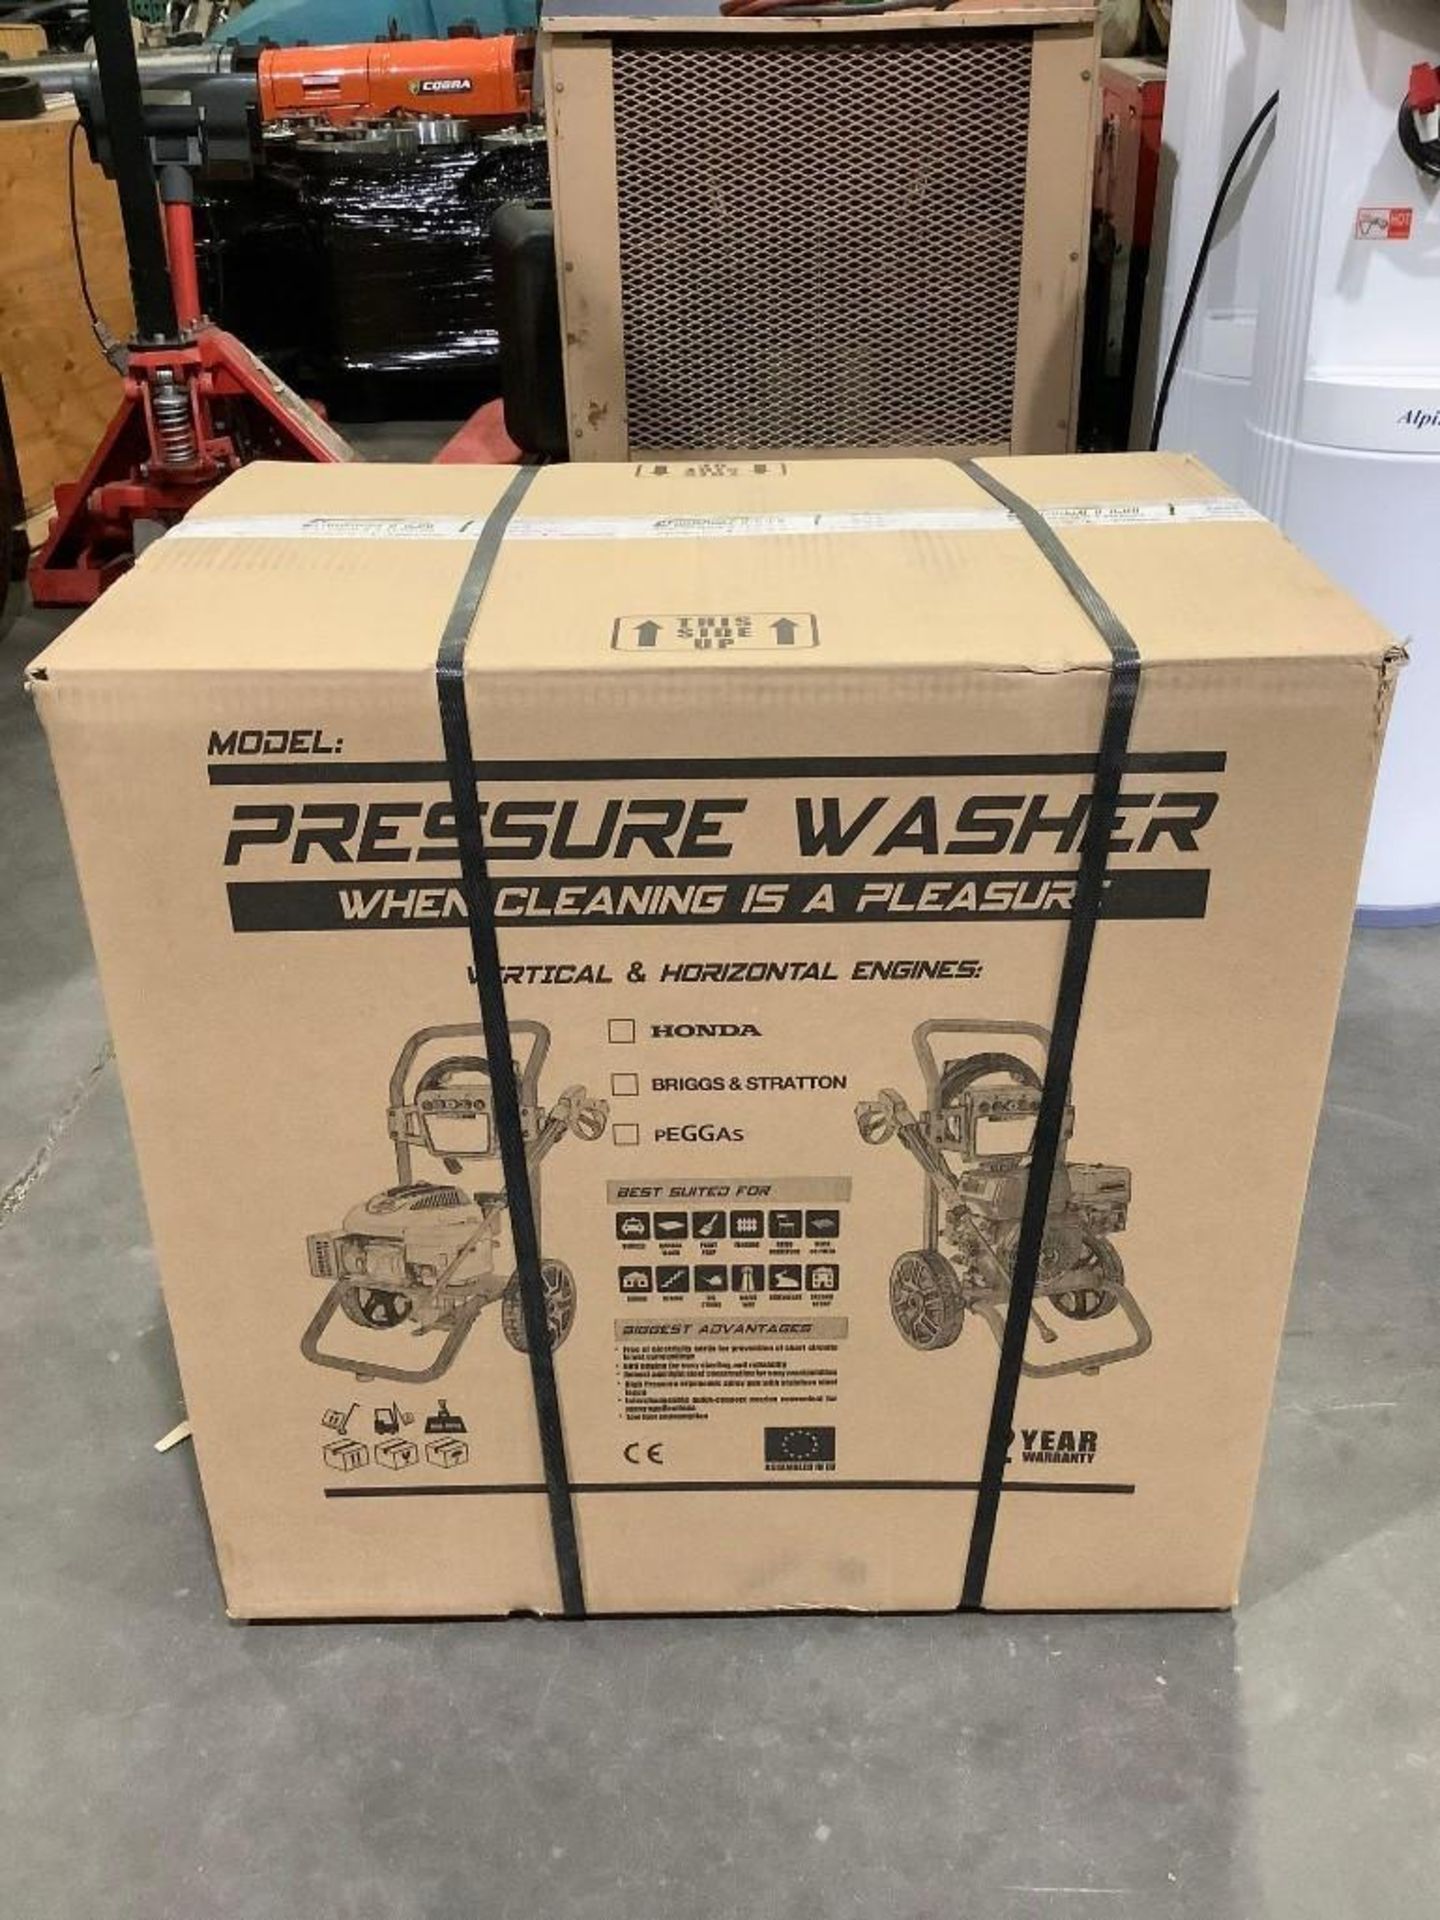 UNUSED WASPPER PRESSURE WASHER MODEL W3100VA, GAS POWERED, APPROX 3100PSI, APPROX 2.9 GPM, APPROX 6,